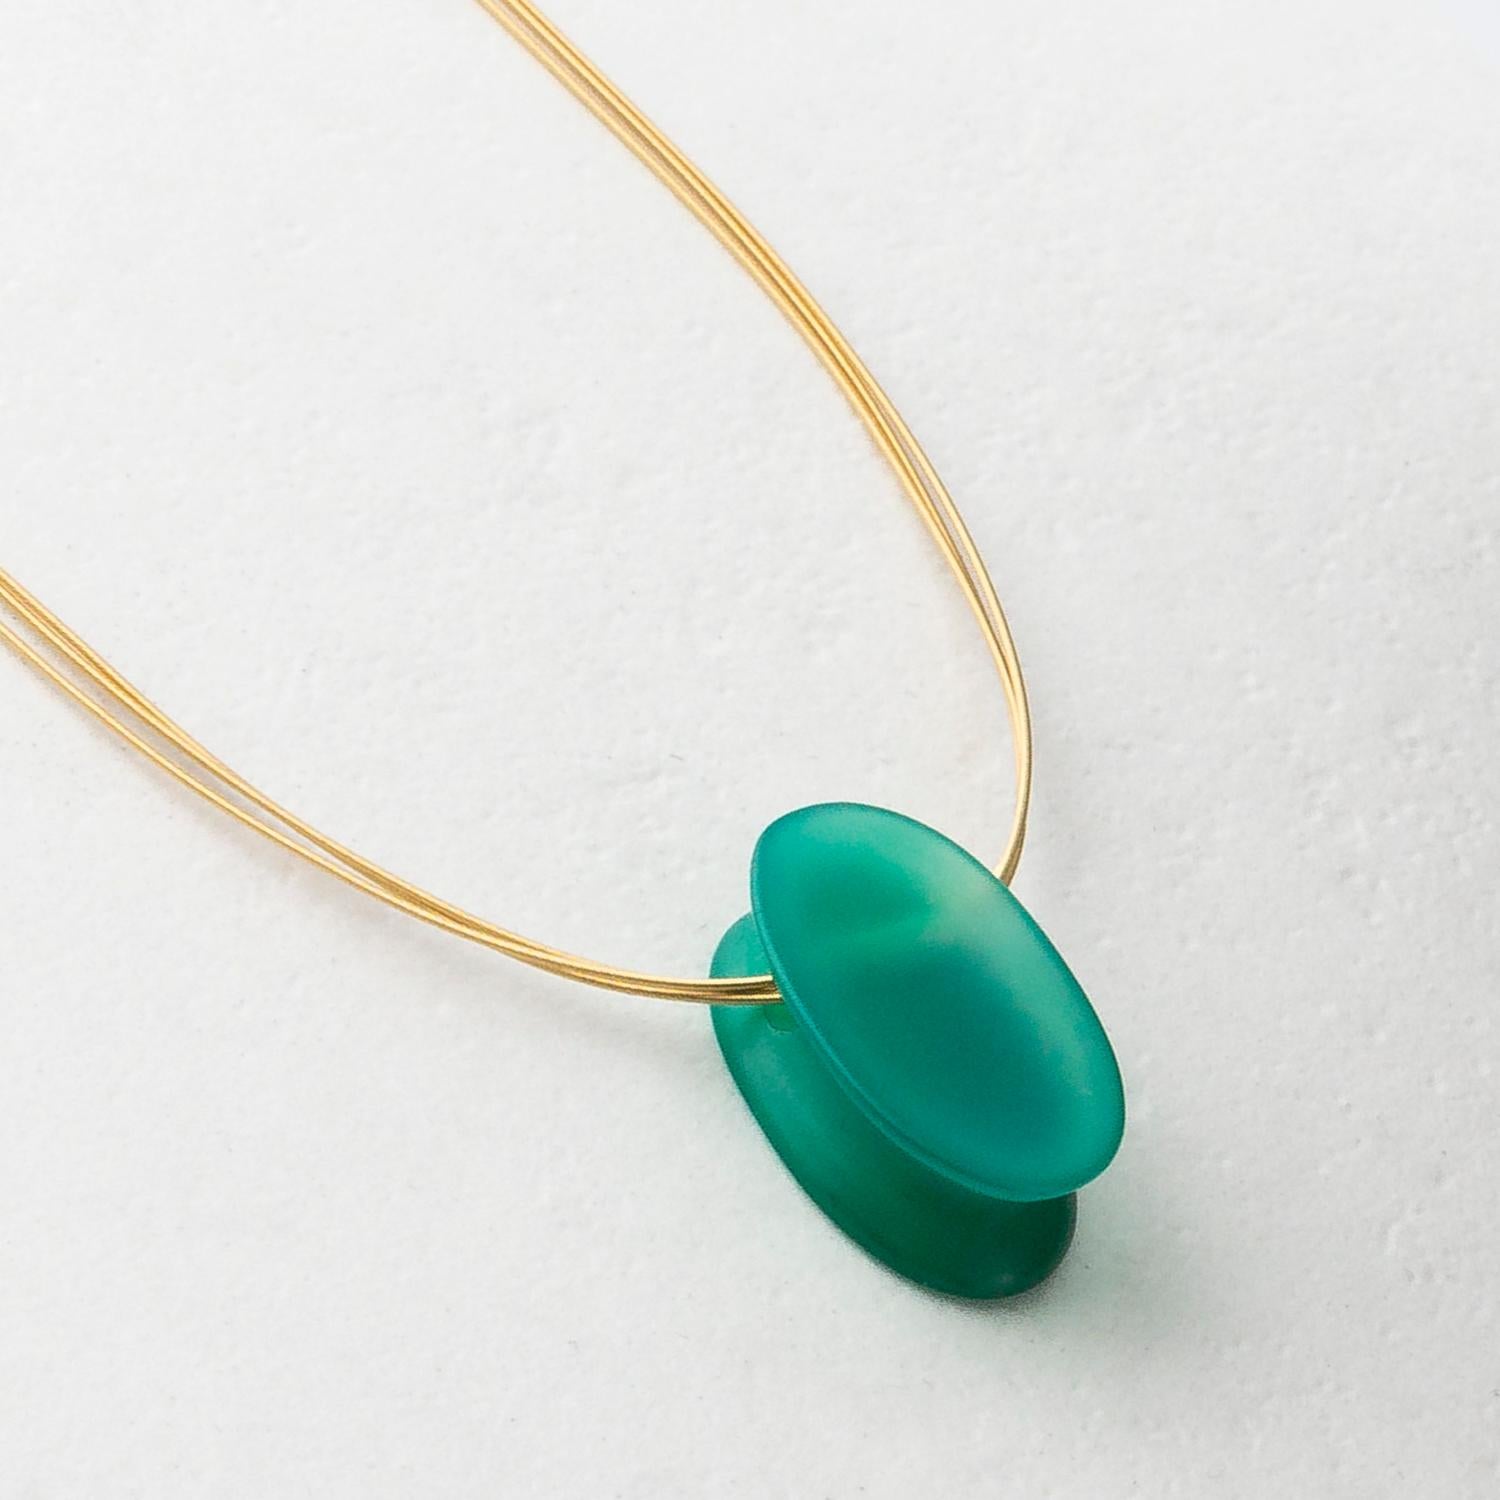 Handcarved by Dieter Lorenz, one of the top names in contemporary gem-carving, this green Agate pendant is carved into a lozenge shape with a narrow interior and hung on an 18 Karat Yellow Gold multi strand necklace.

Made by hand in our family run